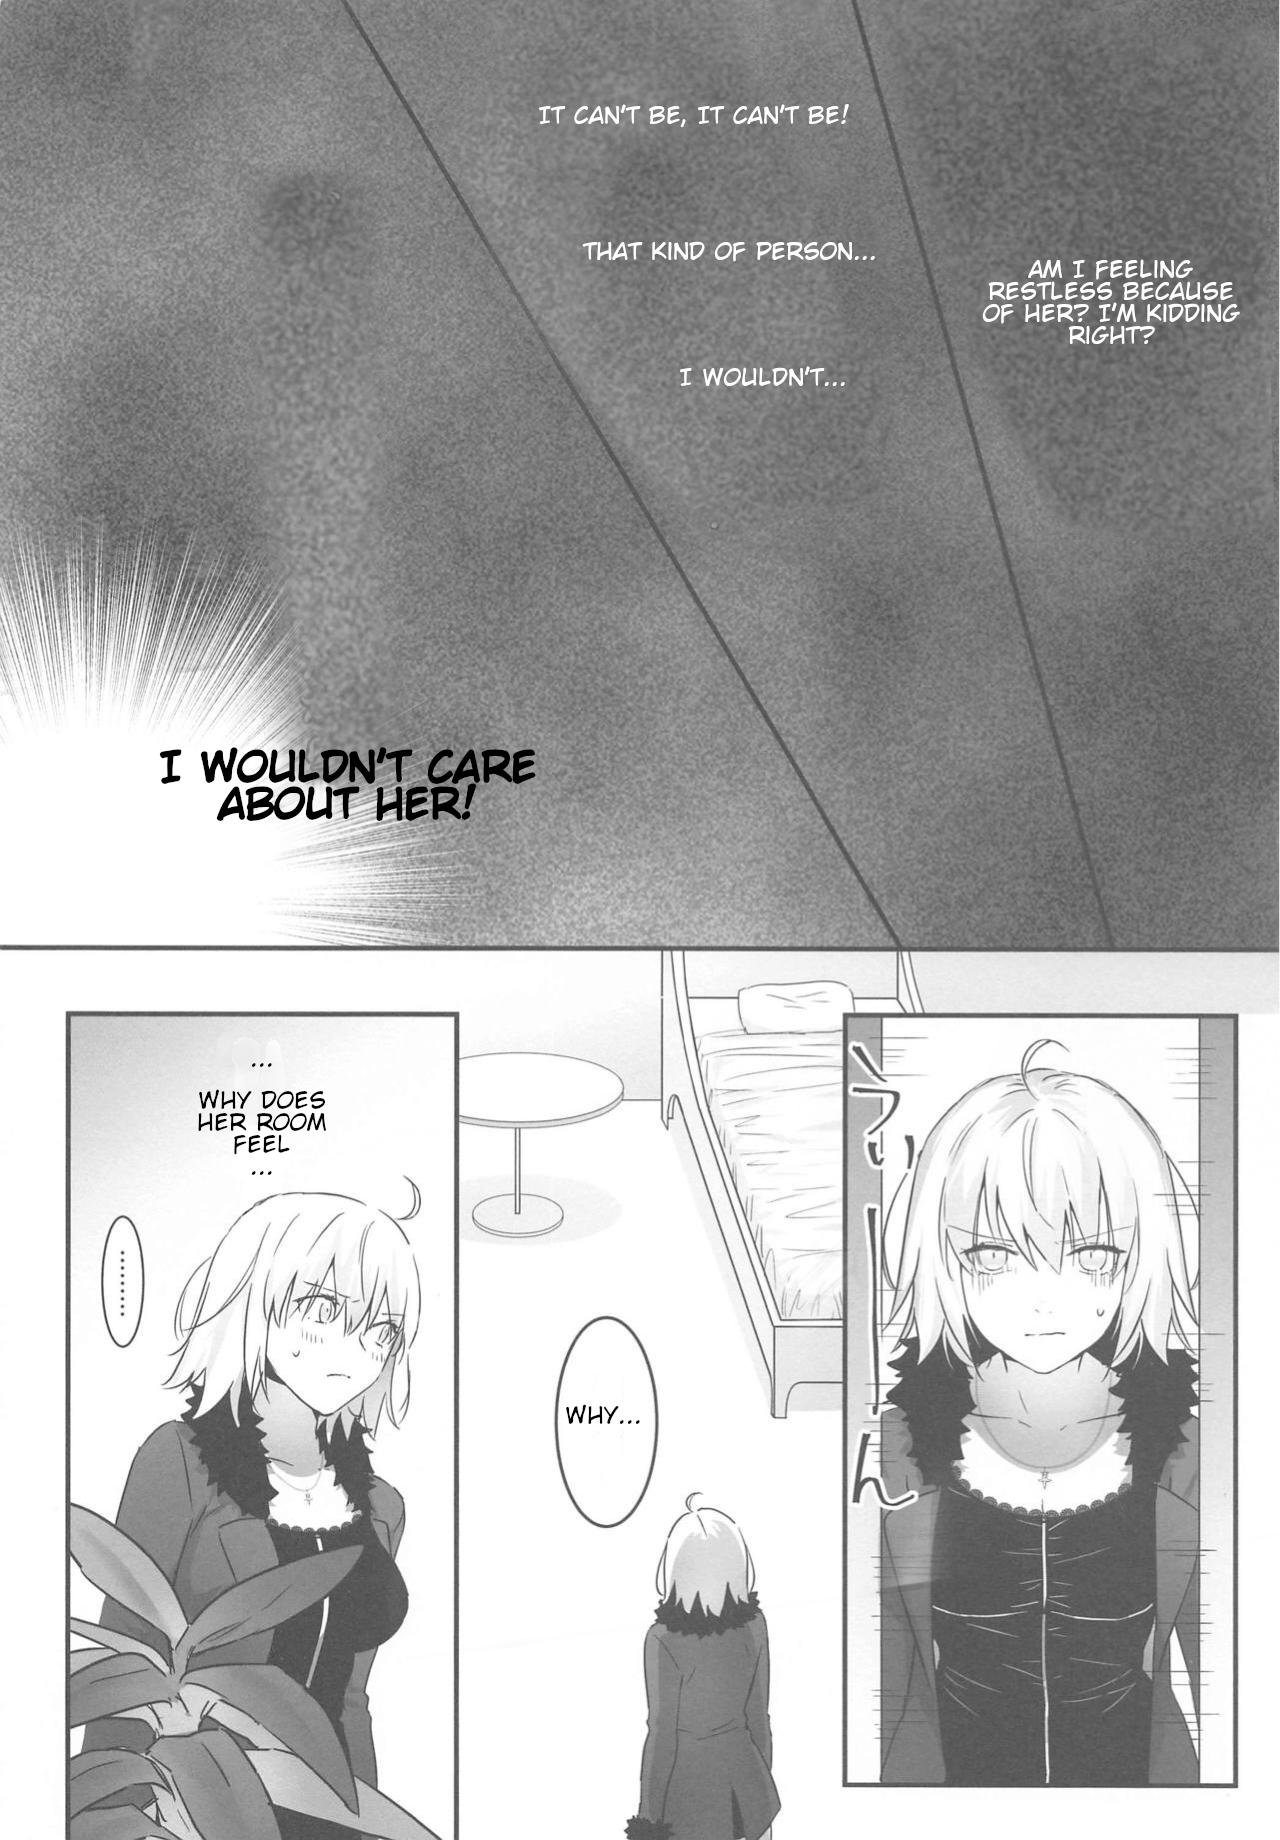 Van alter's secret. - Fate grand order Sex Pussy - Page 9